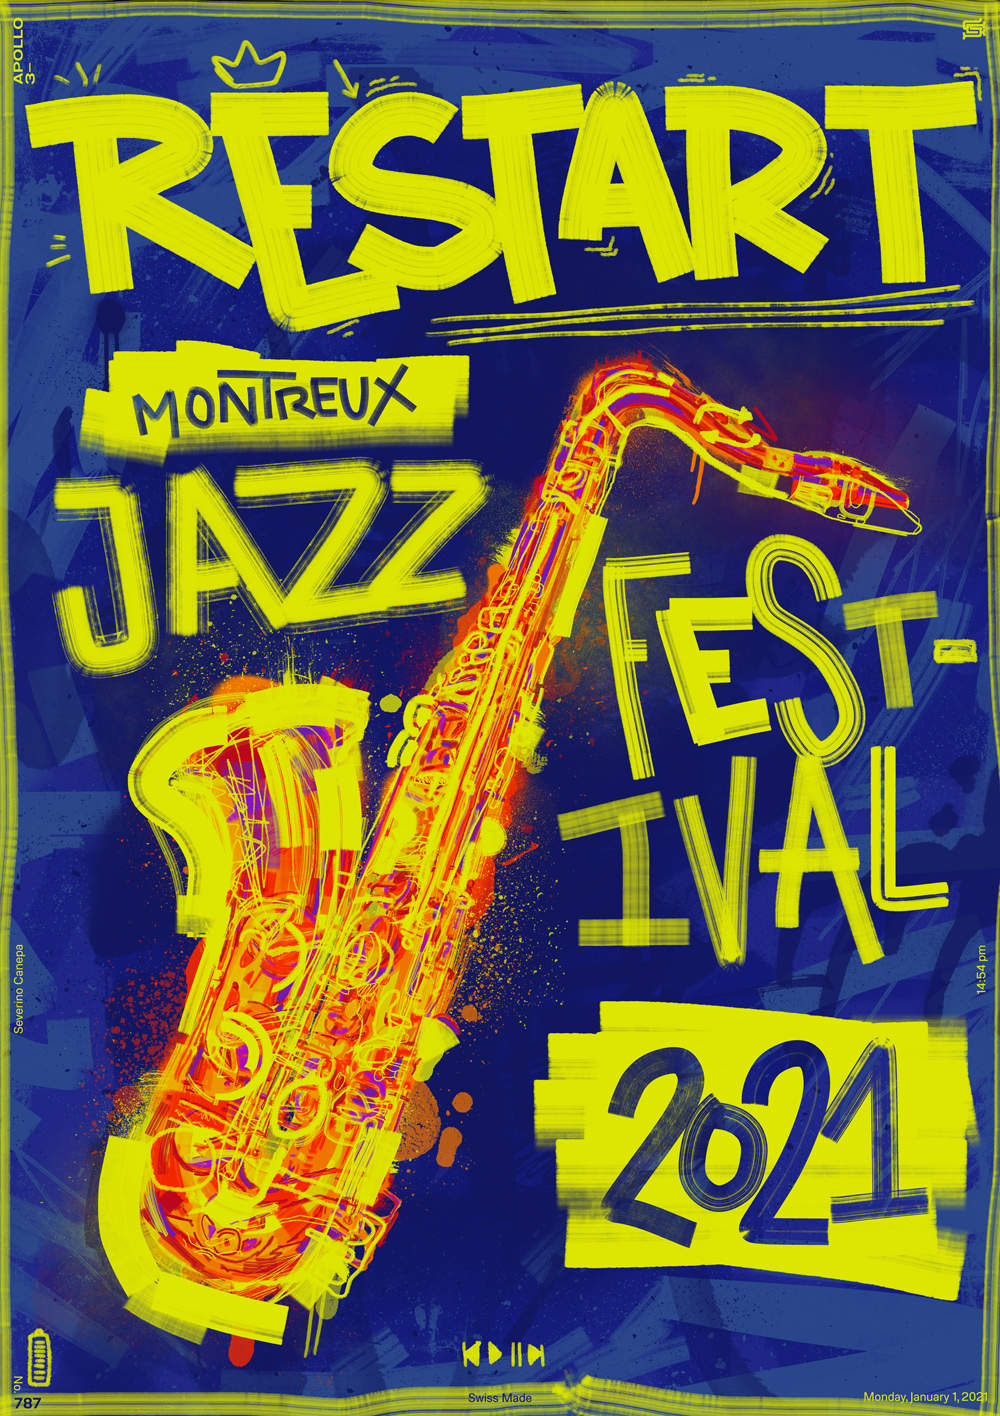 Visual I give to Montreux Jazz Festival Restart contest